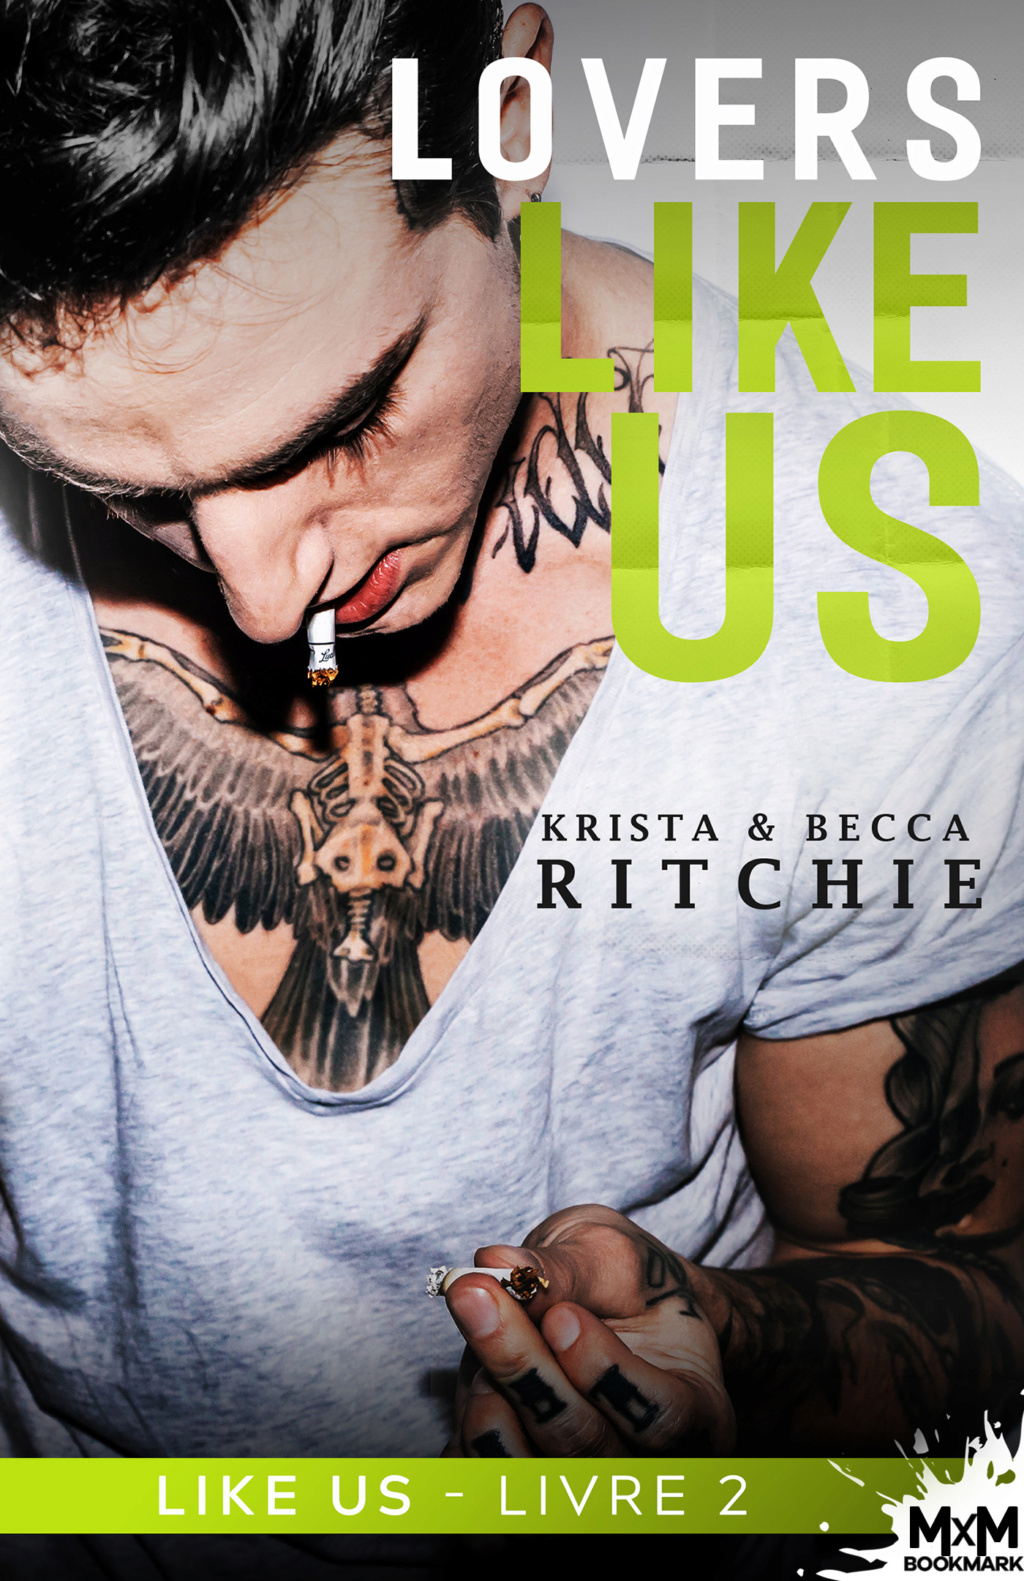 Like us - Tome 2 : Lovers like us de Krista Ritchie & Becca Ritchie F06e1d10